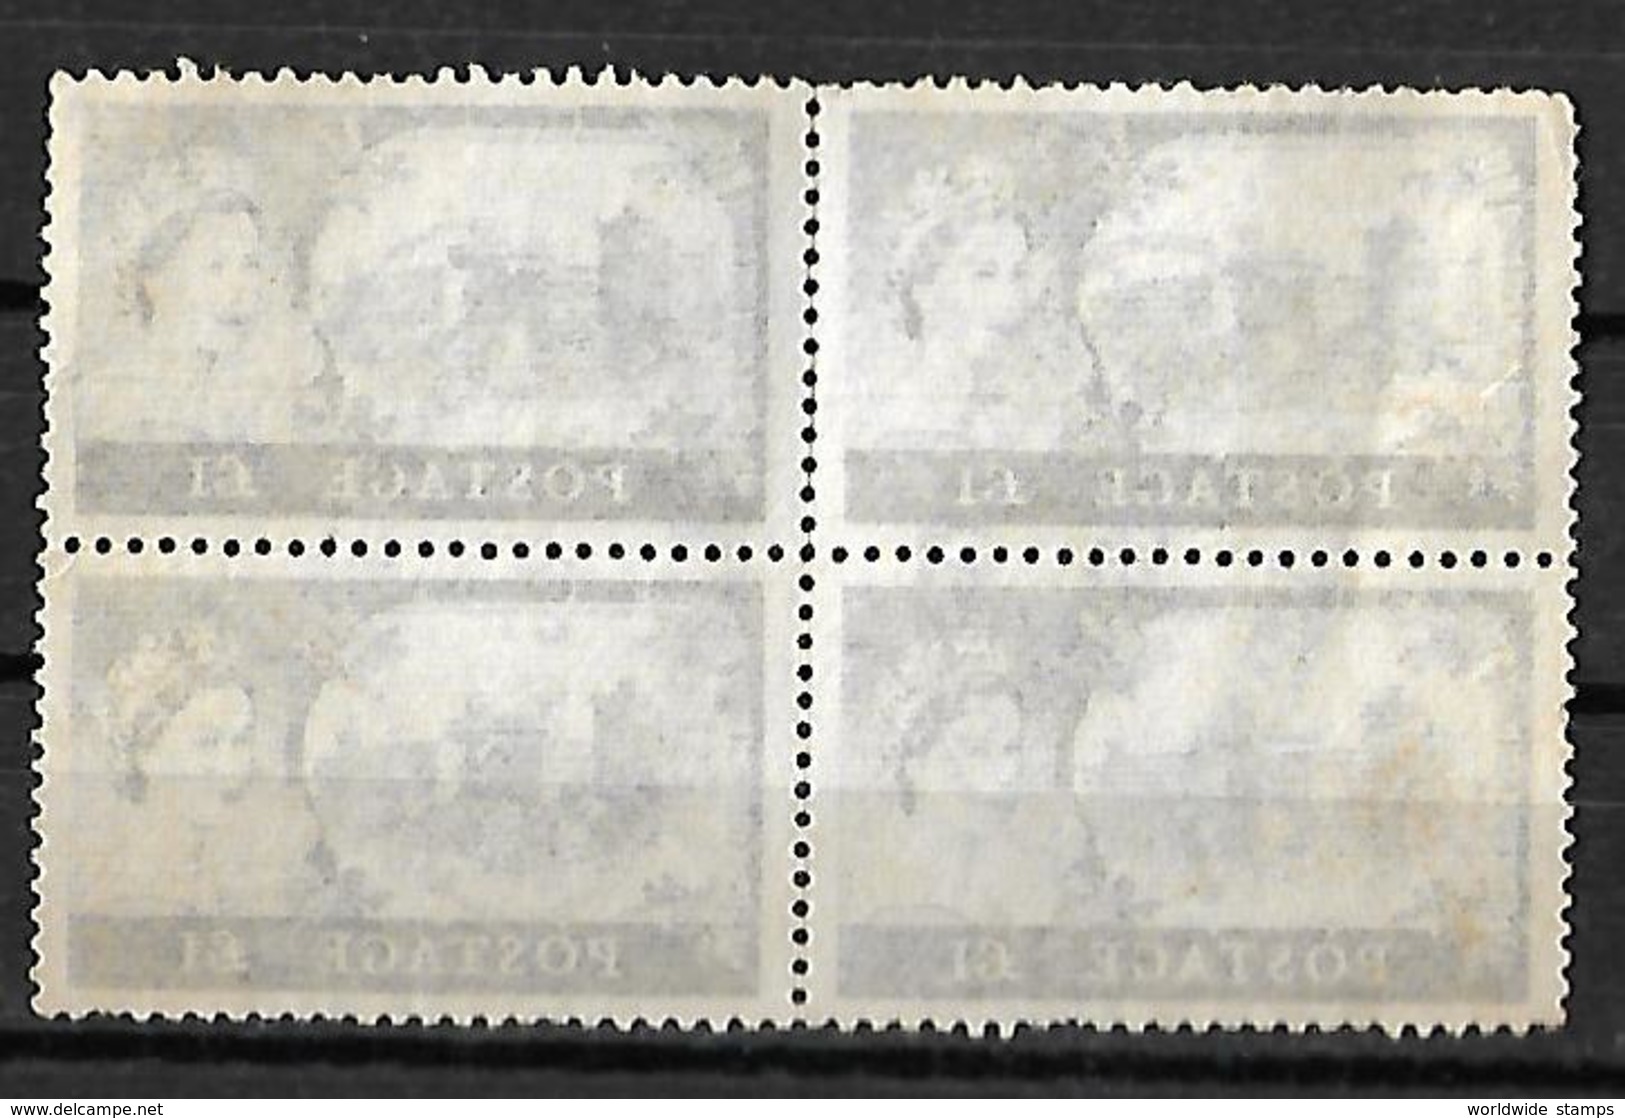 Great Britain 1959 £1 Wilding Castle  Block Of 4 England  High Value Used Stamps - Ungebraucht